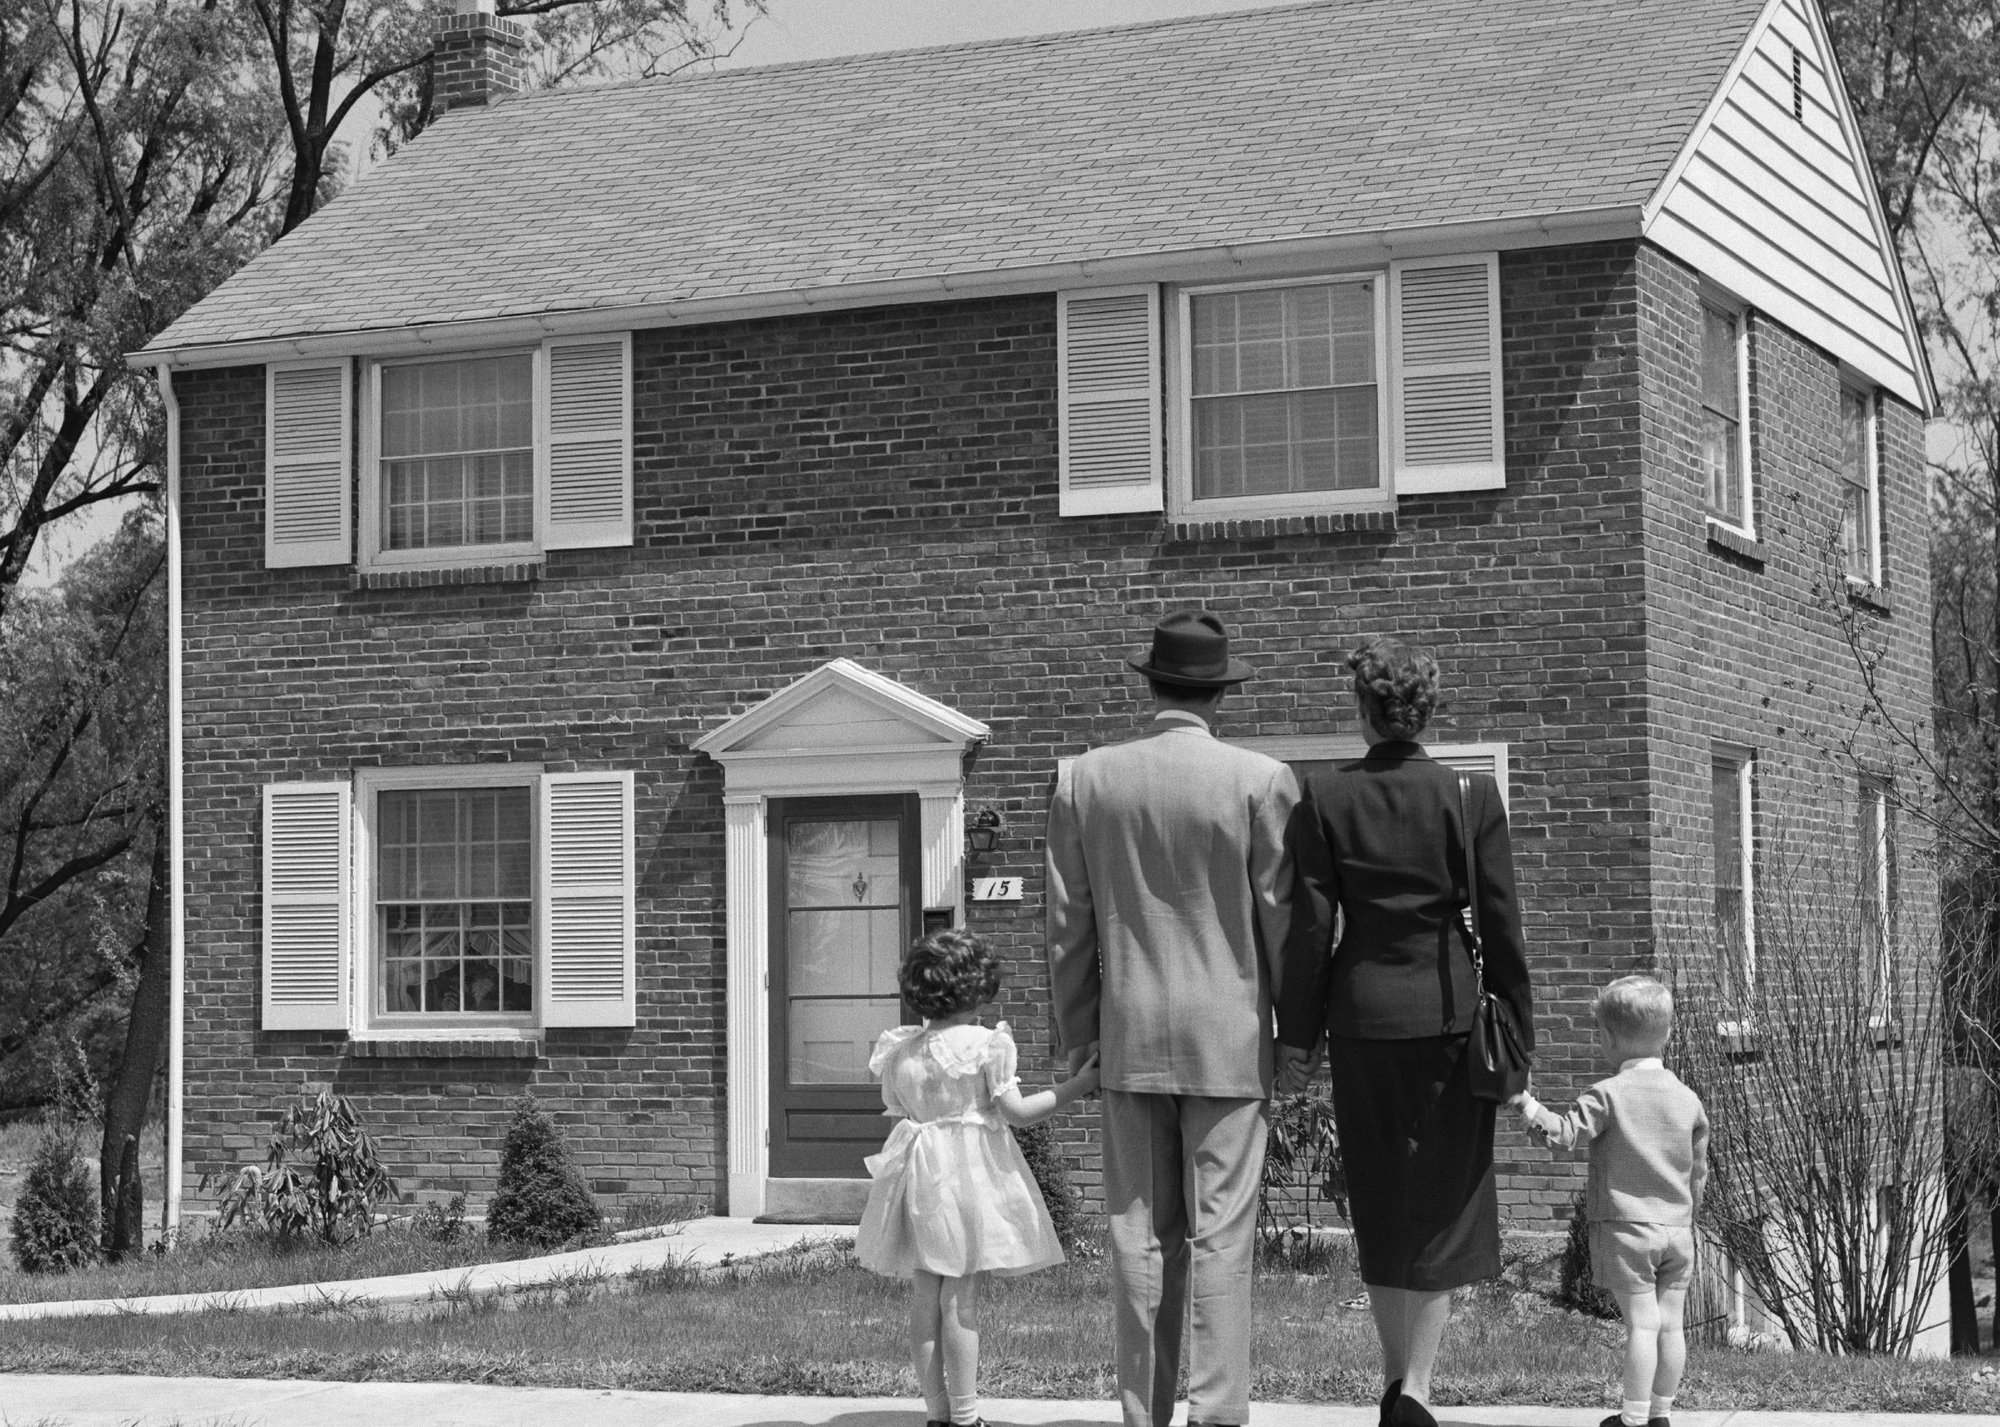 Black-and-white photo of a family of 4 standing in front of a two-story brick home - Armstrong Roberts/ClassicStock // Getty Images